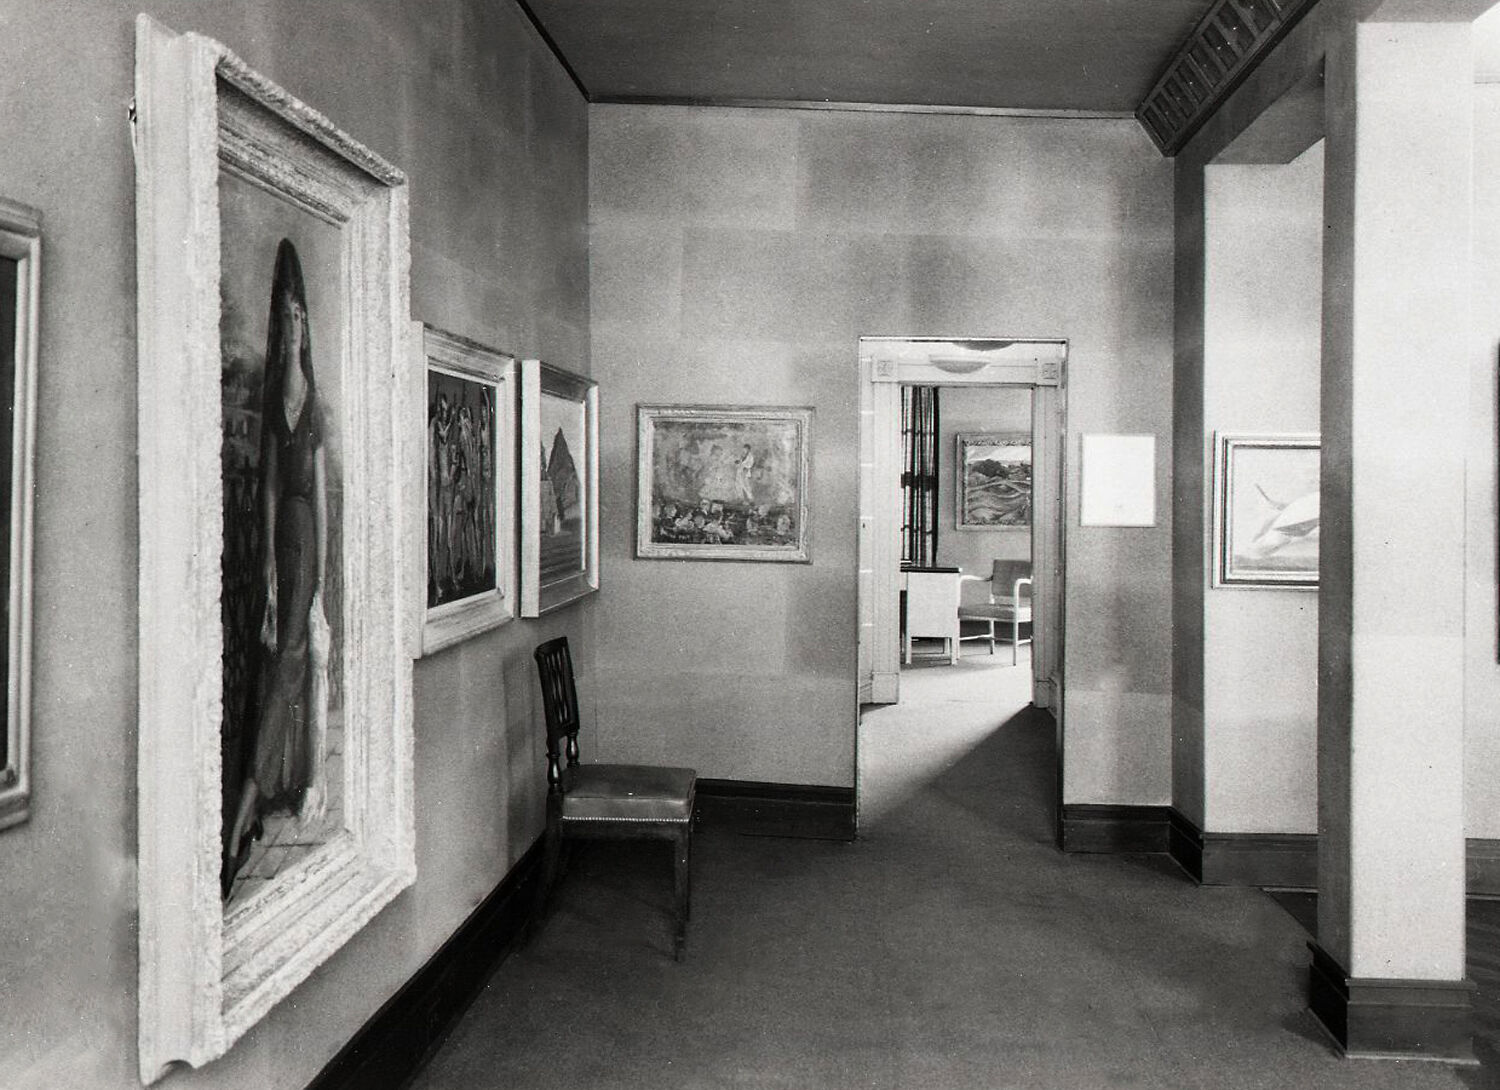 Black-and-white photograph of paintings hanging in a hallway.